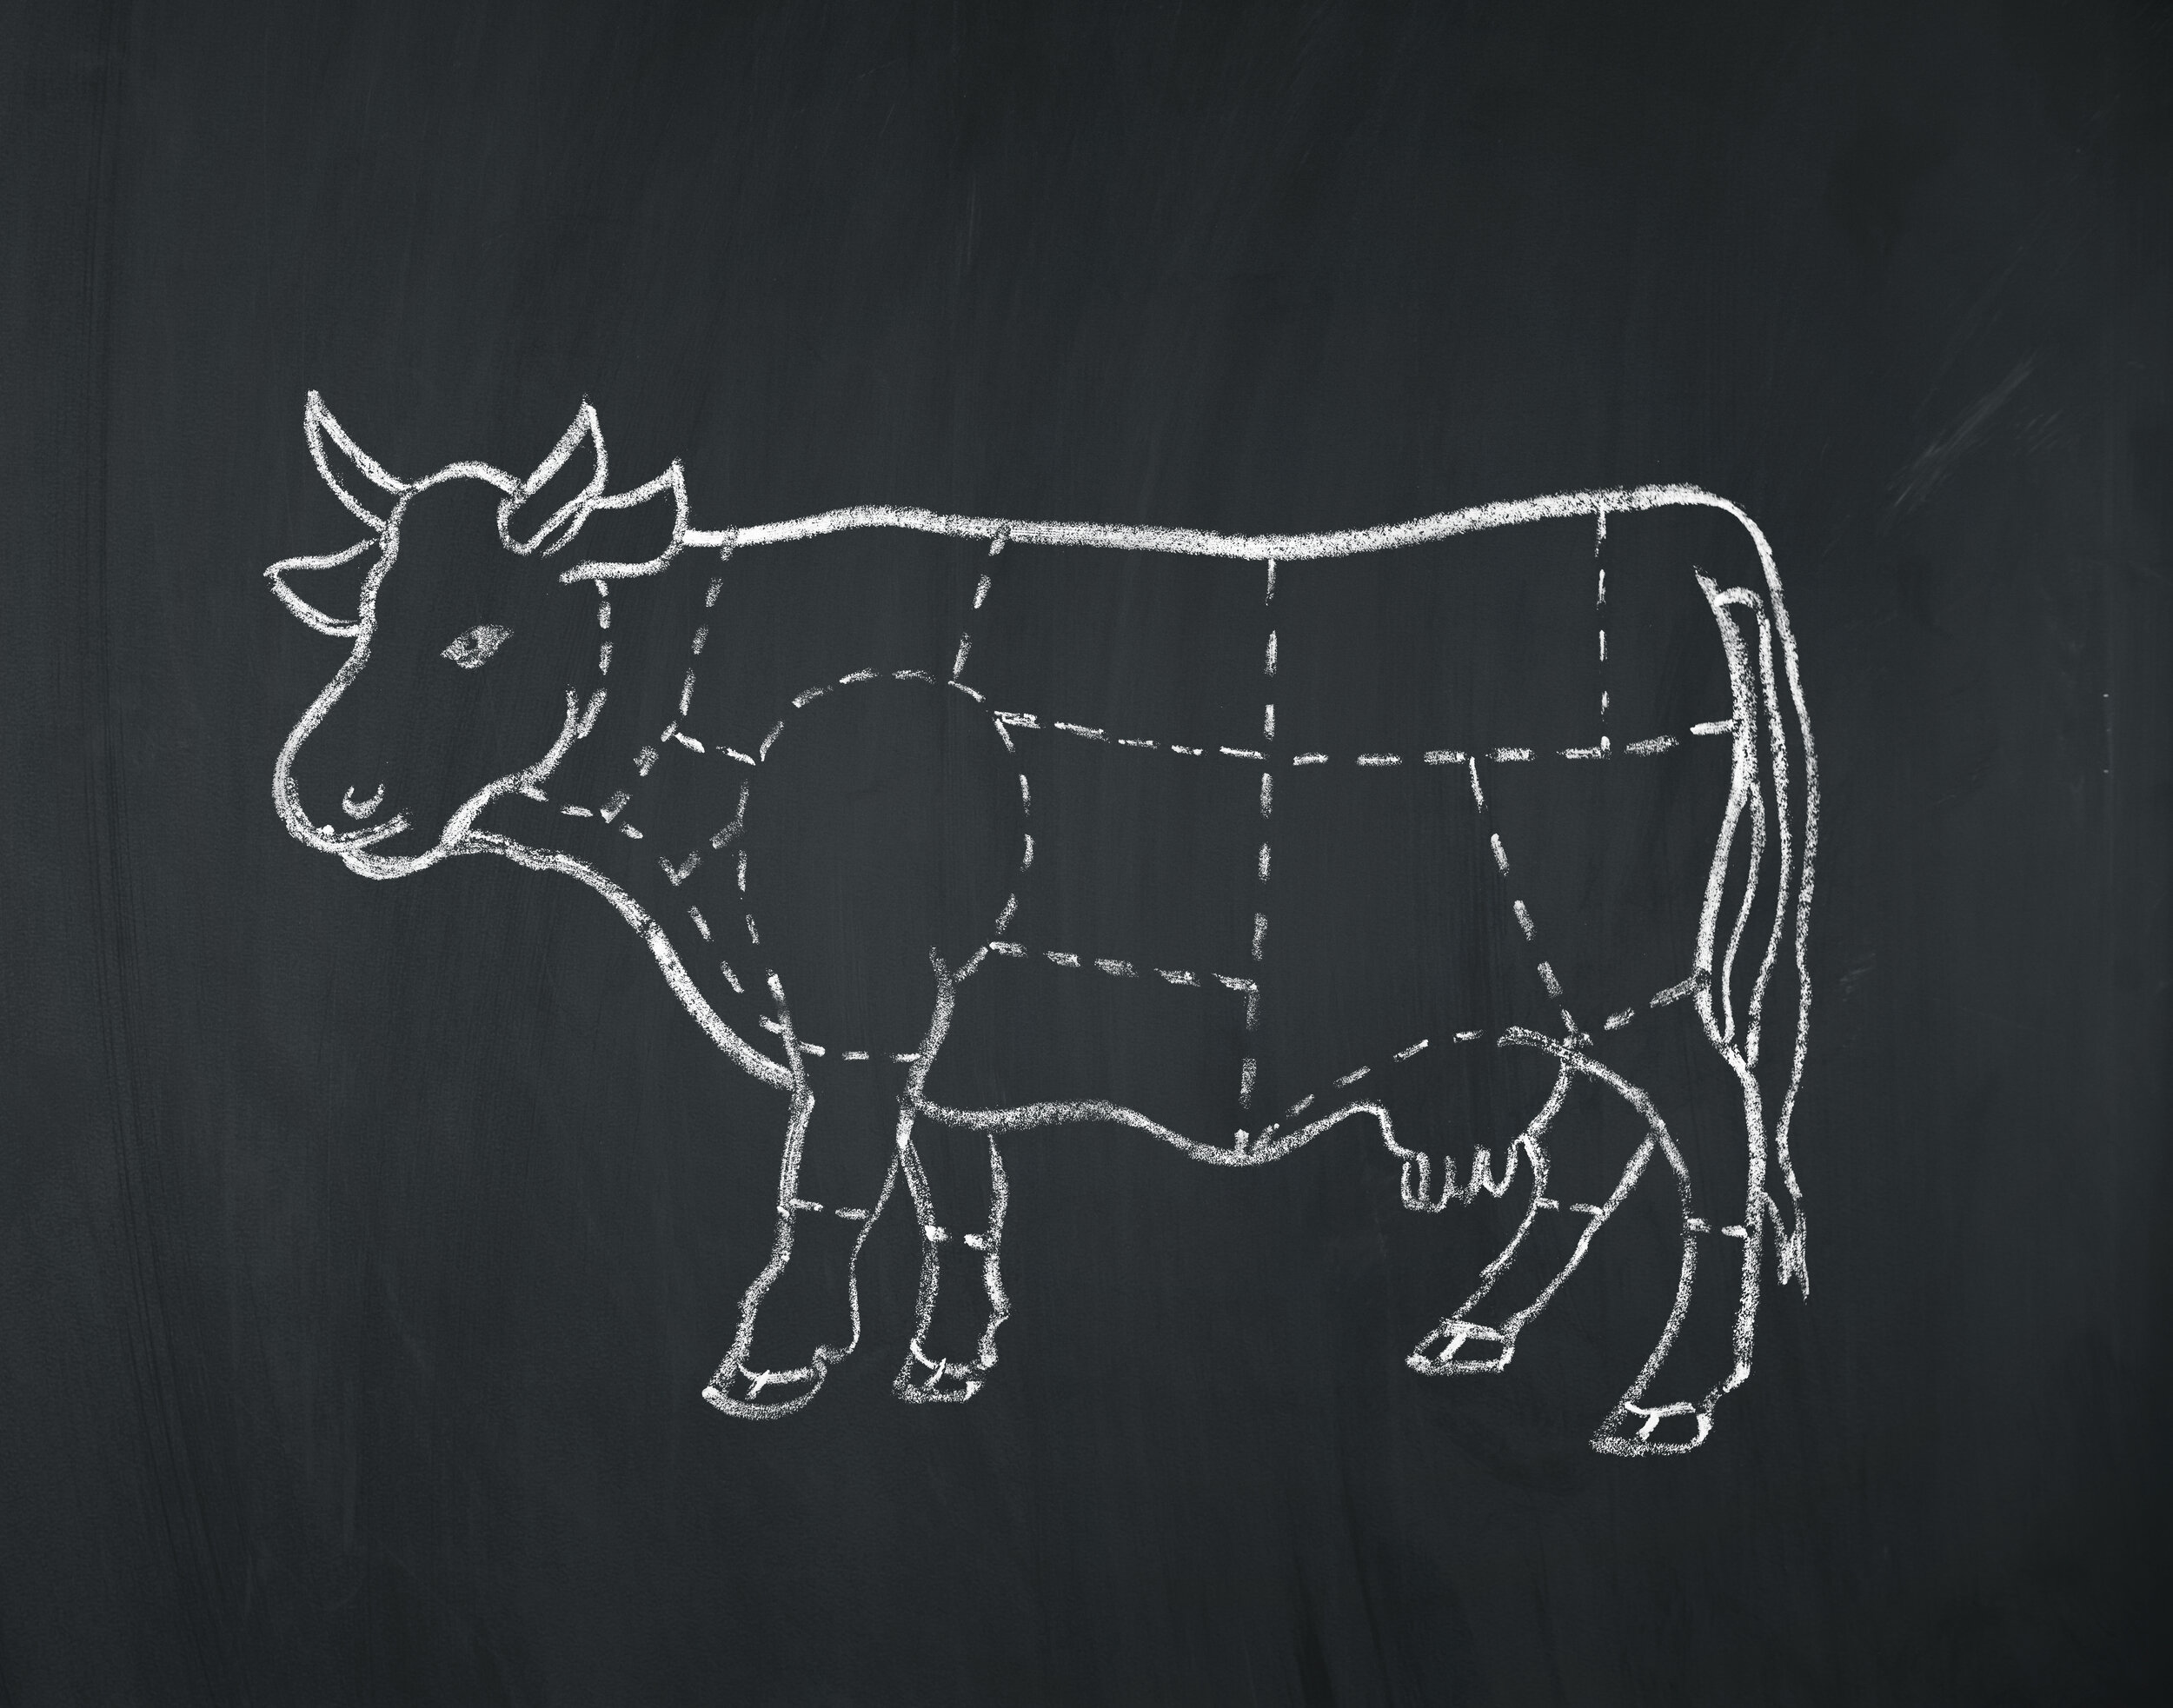 meat-diagram-of-a-cow-481577650_7363x5788.jpeg